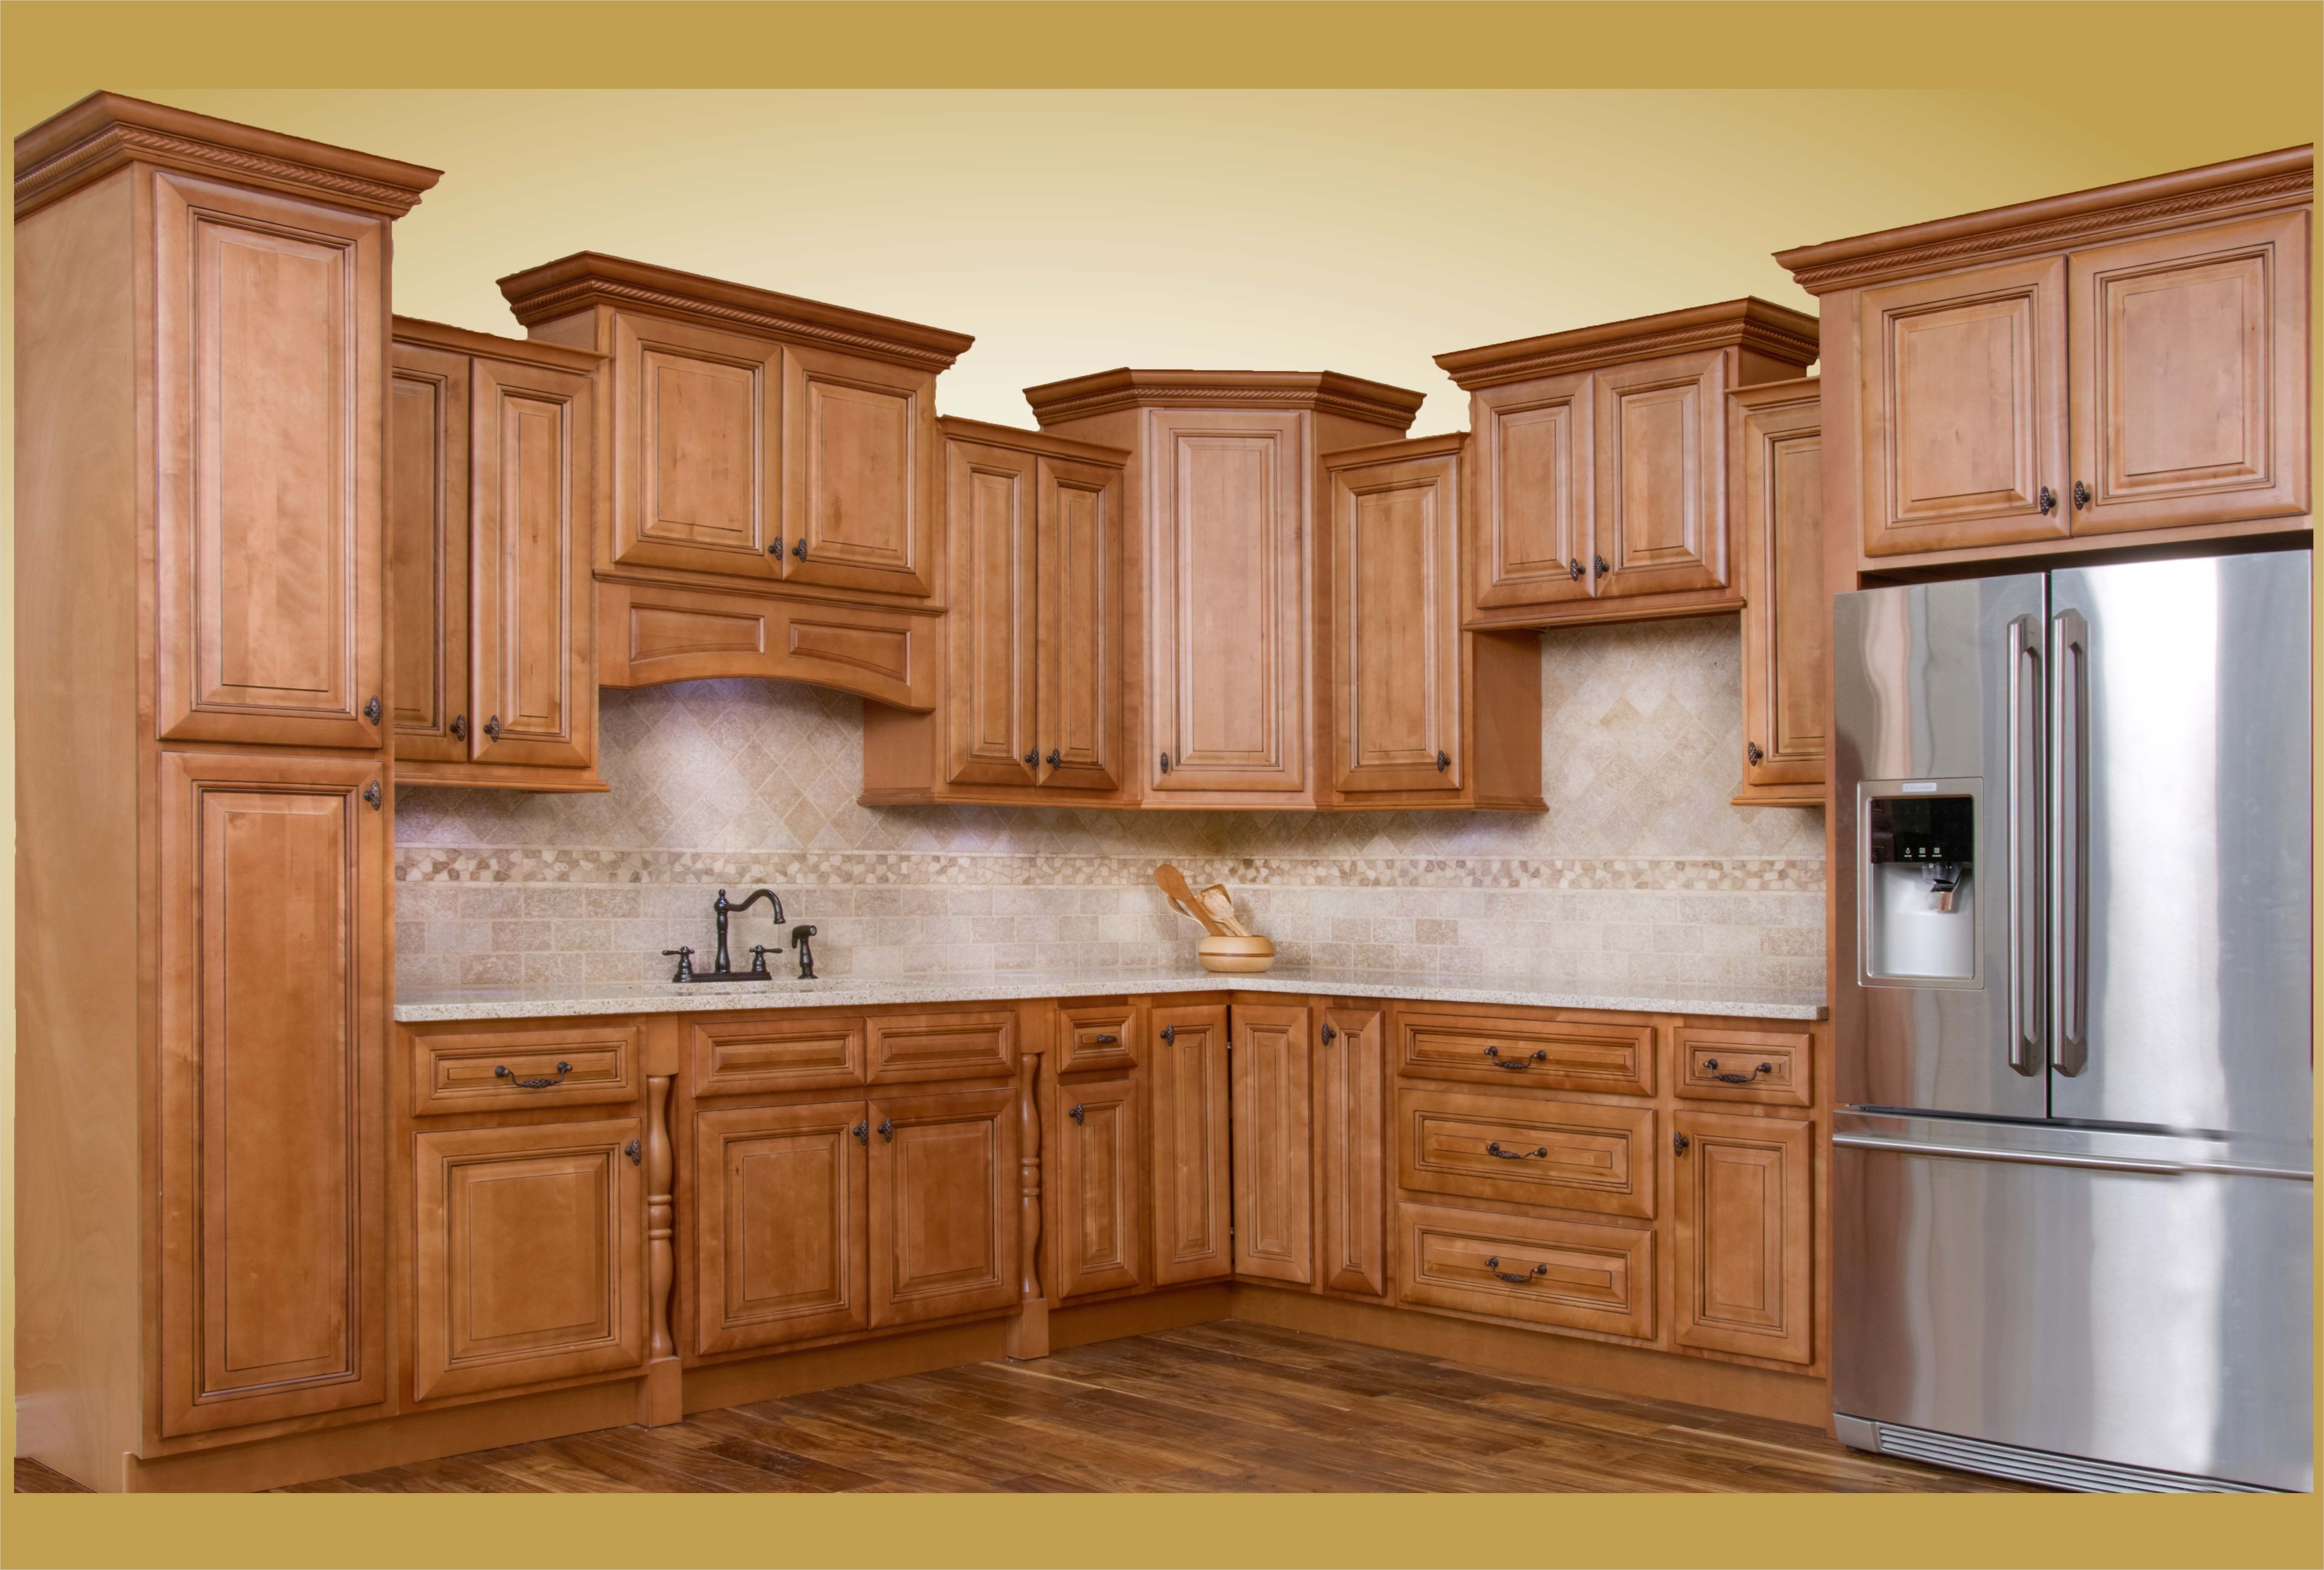 What Is The Difference Between Custom And Stock Cabinets?